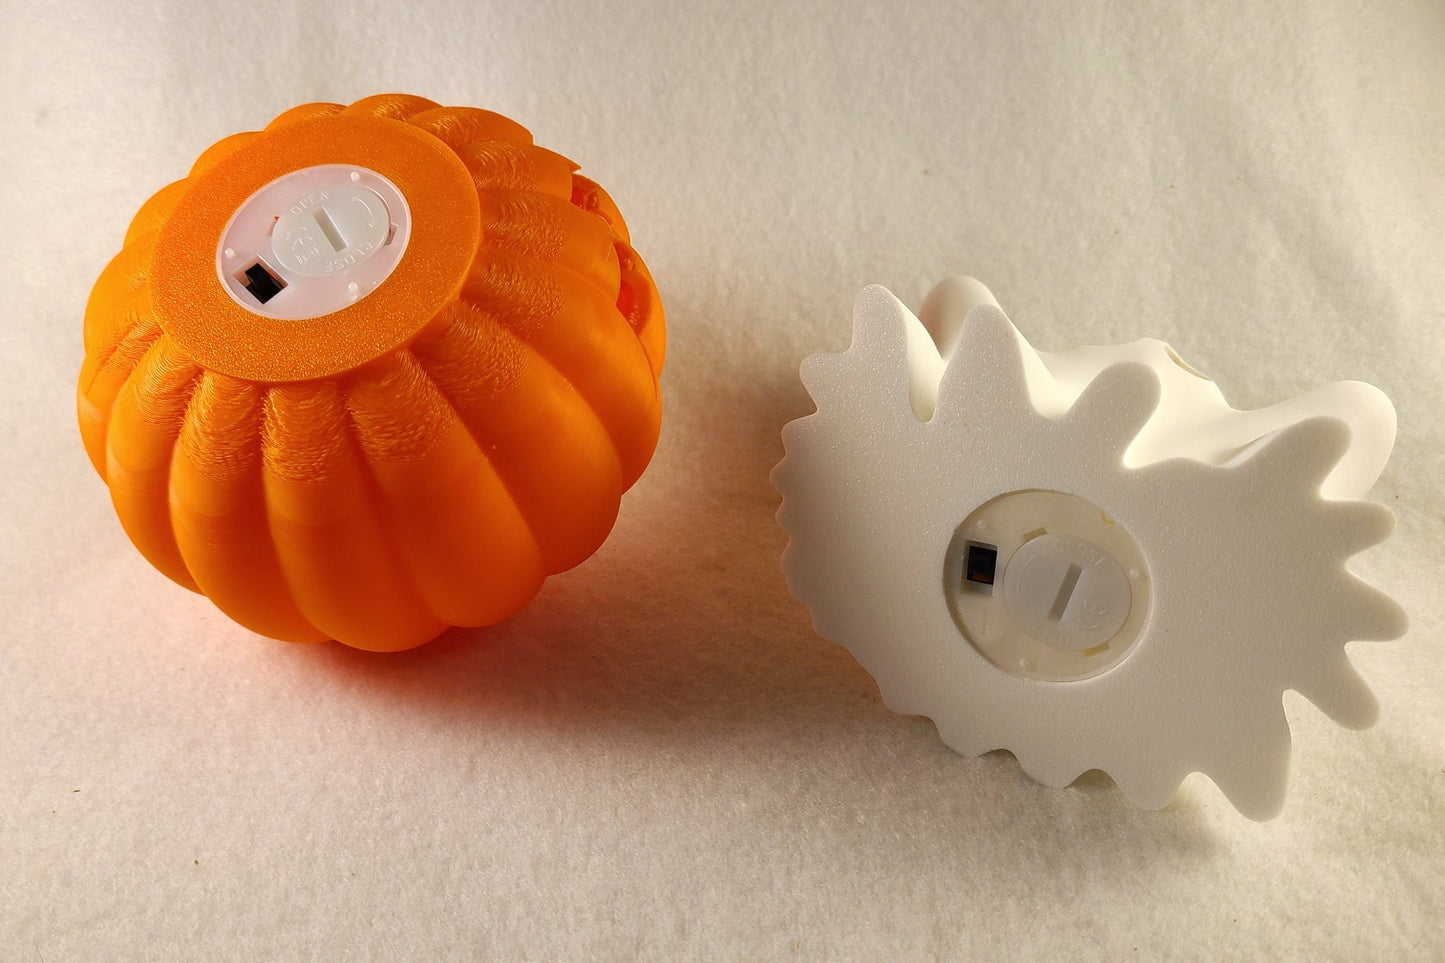 Glowing 3D Printed Ghost and Pumpkin Decor